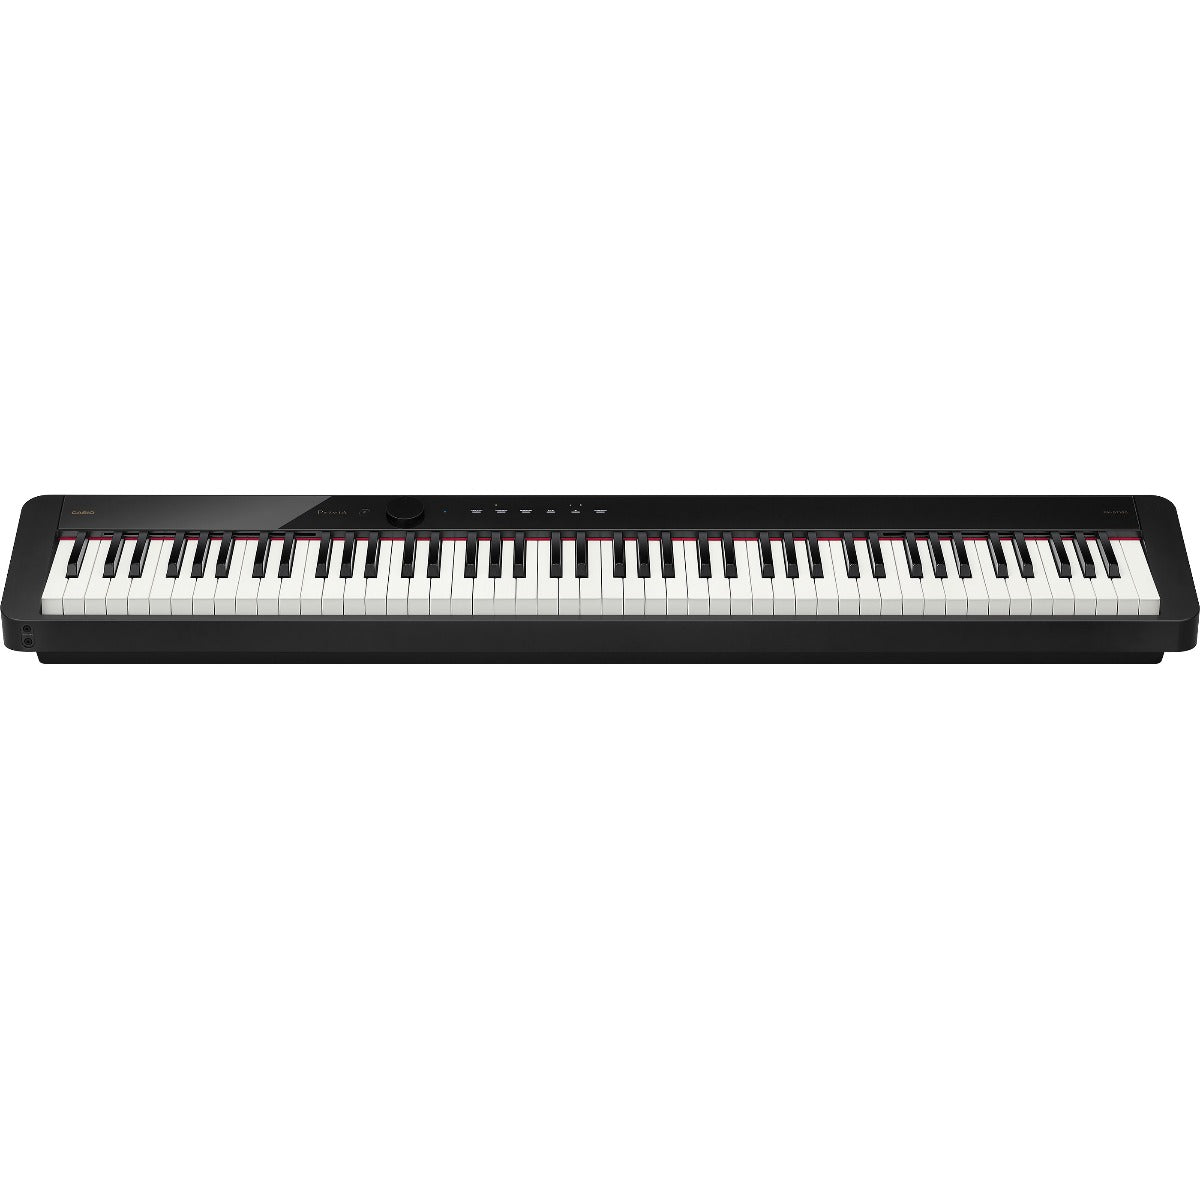 Casio PX S1100 Digital Piano Package, Black